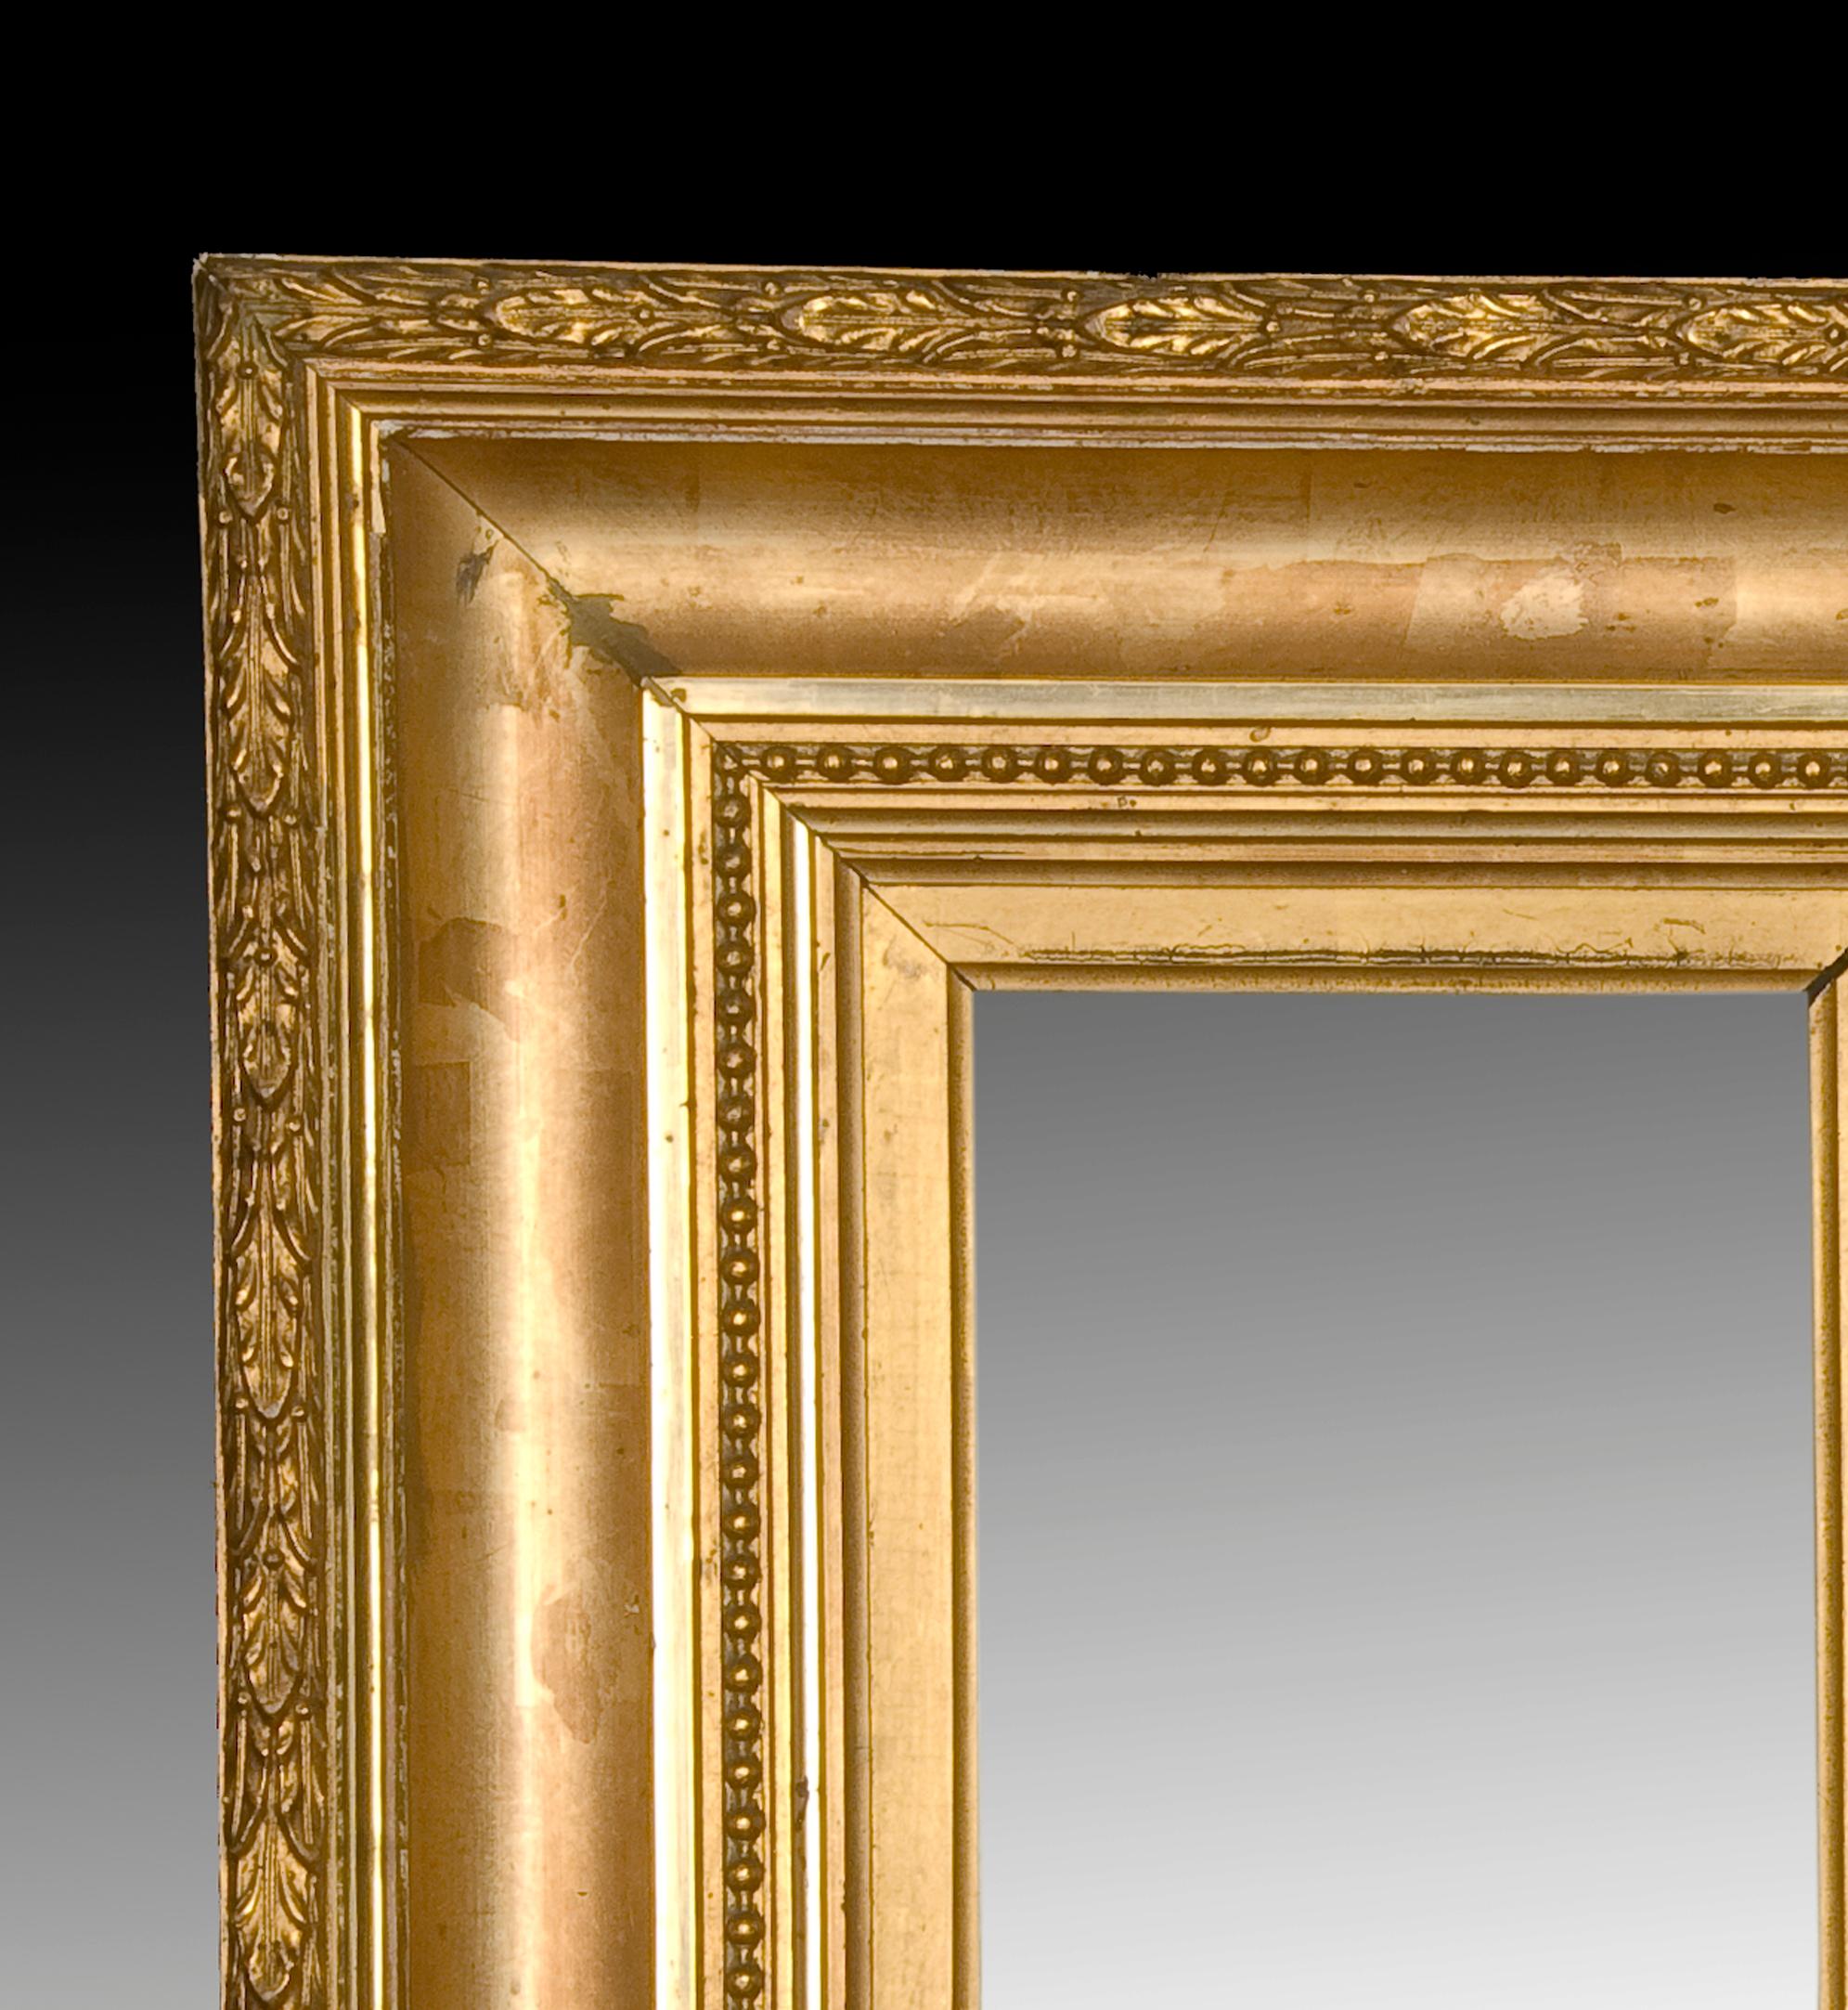 Couple of frames. Wood, stucco, 19th century.
Pair of rectangular frames made of carved and overcast wood decorated with a series of moldings of different widths, some smooth and flat, others smooth and curved and two decorated with elements of